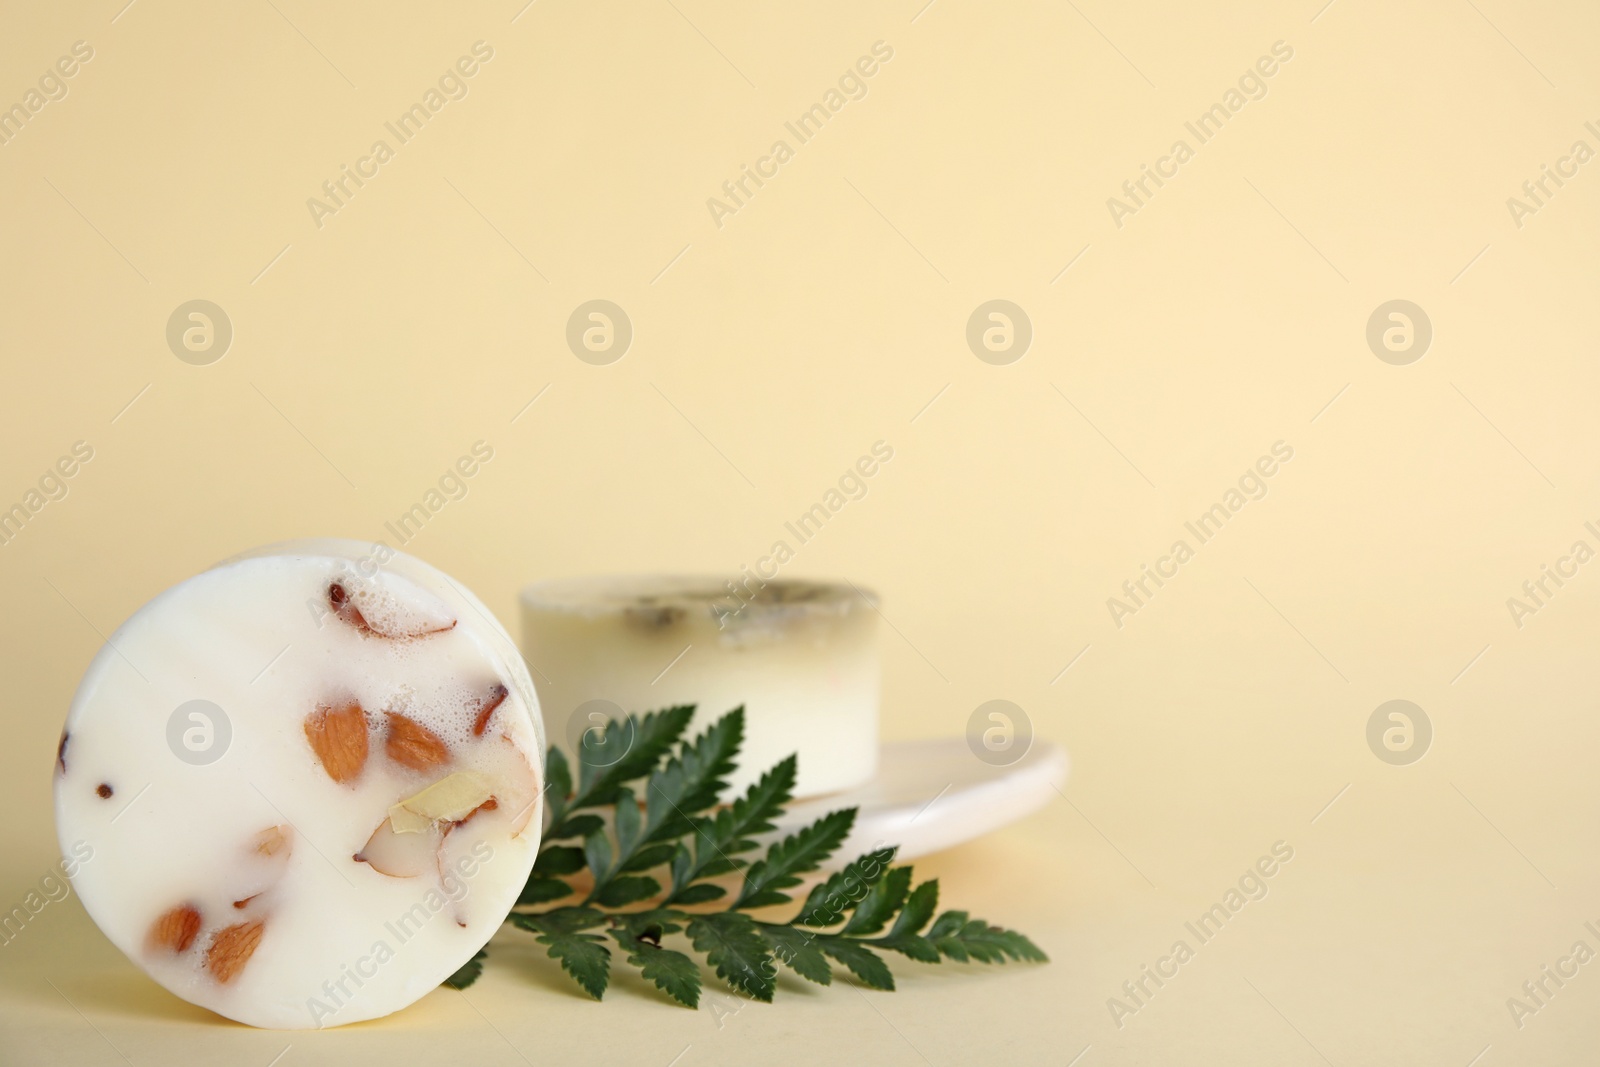 Photo of Soap bars and green leaf on beige background, space for text. Eco friendly personal care product